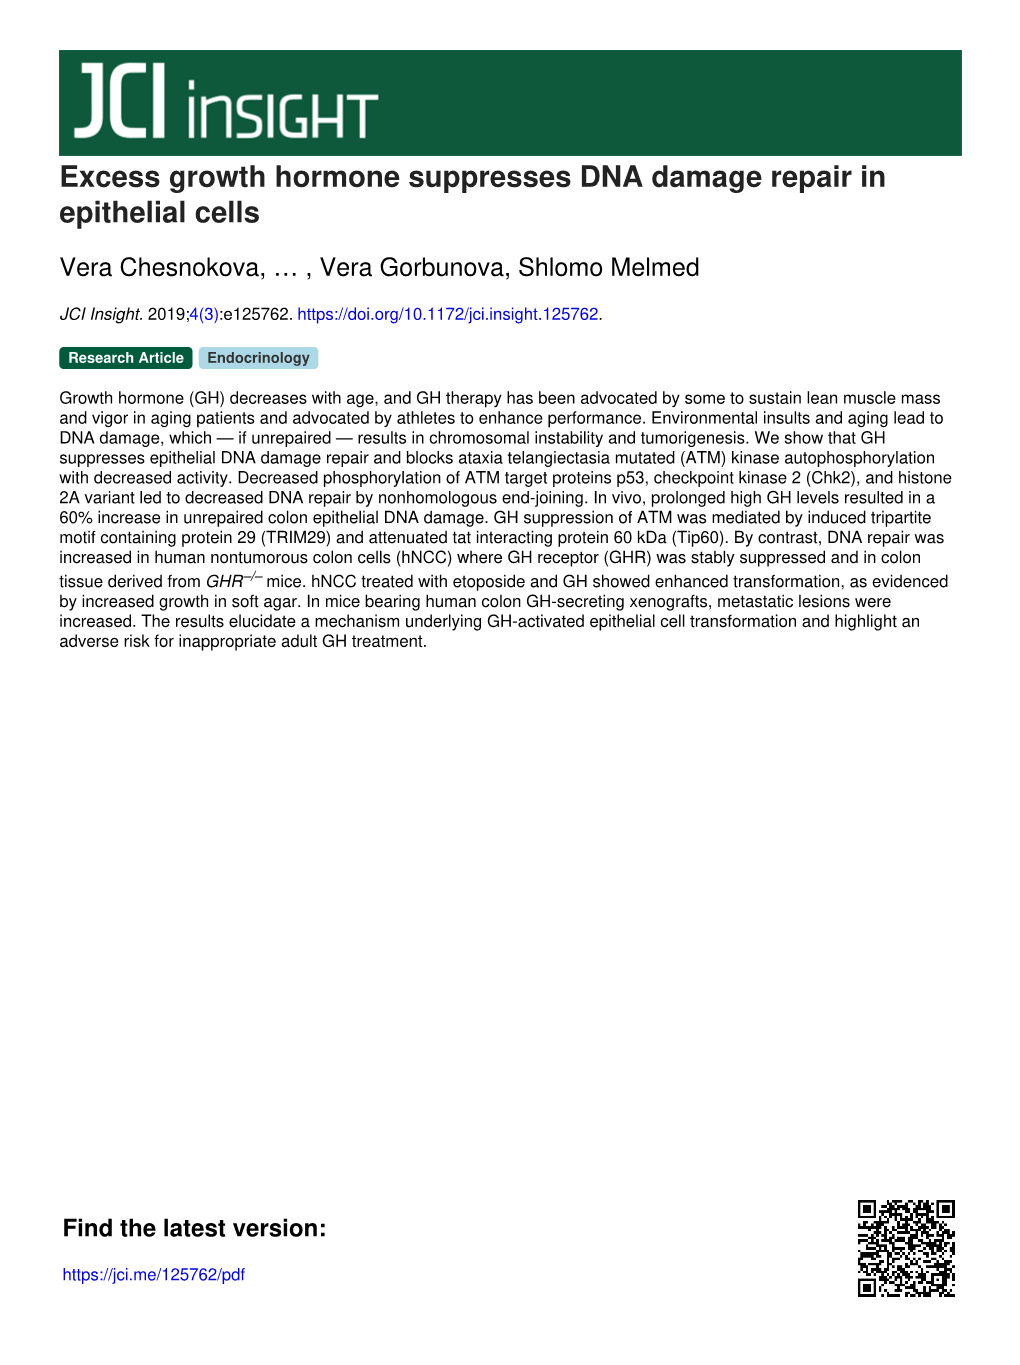 Excess Growth Hormone Suppresses DNA Damage Repair in Epithelial Cells